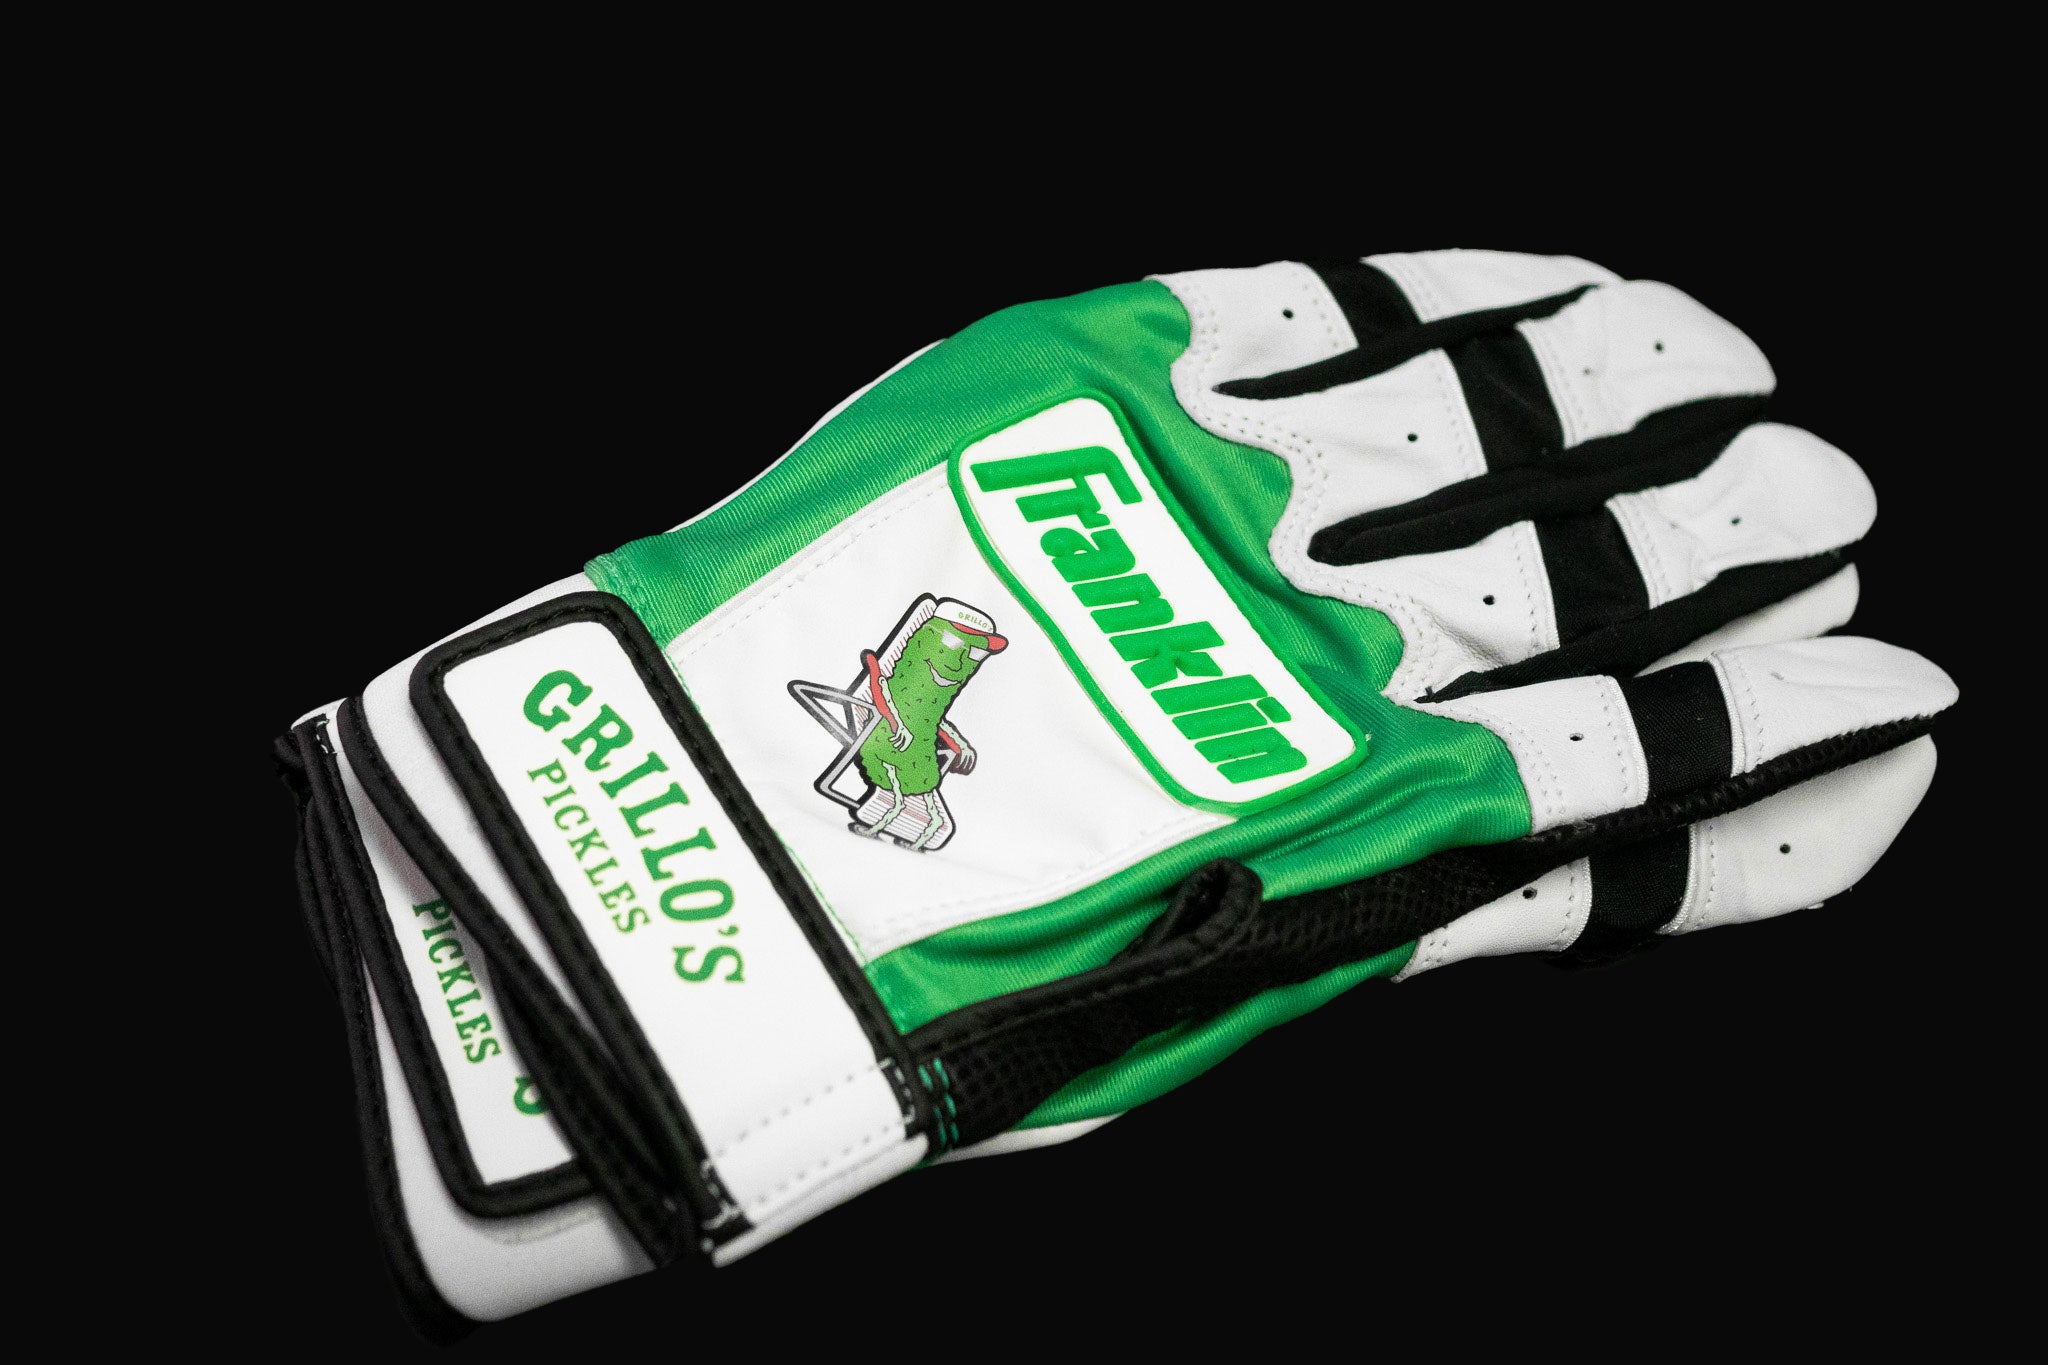 Limited Edition Grillo’s x Franklin Pickle Batting Gloves